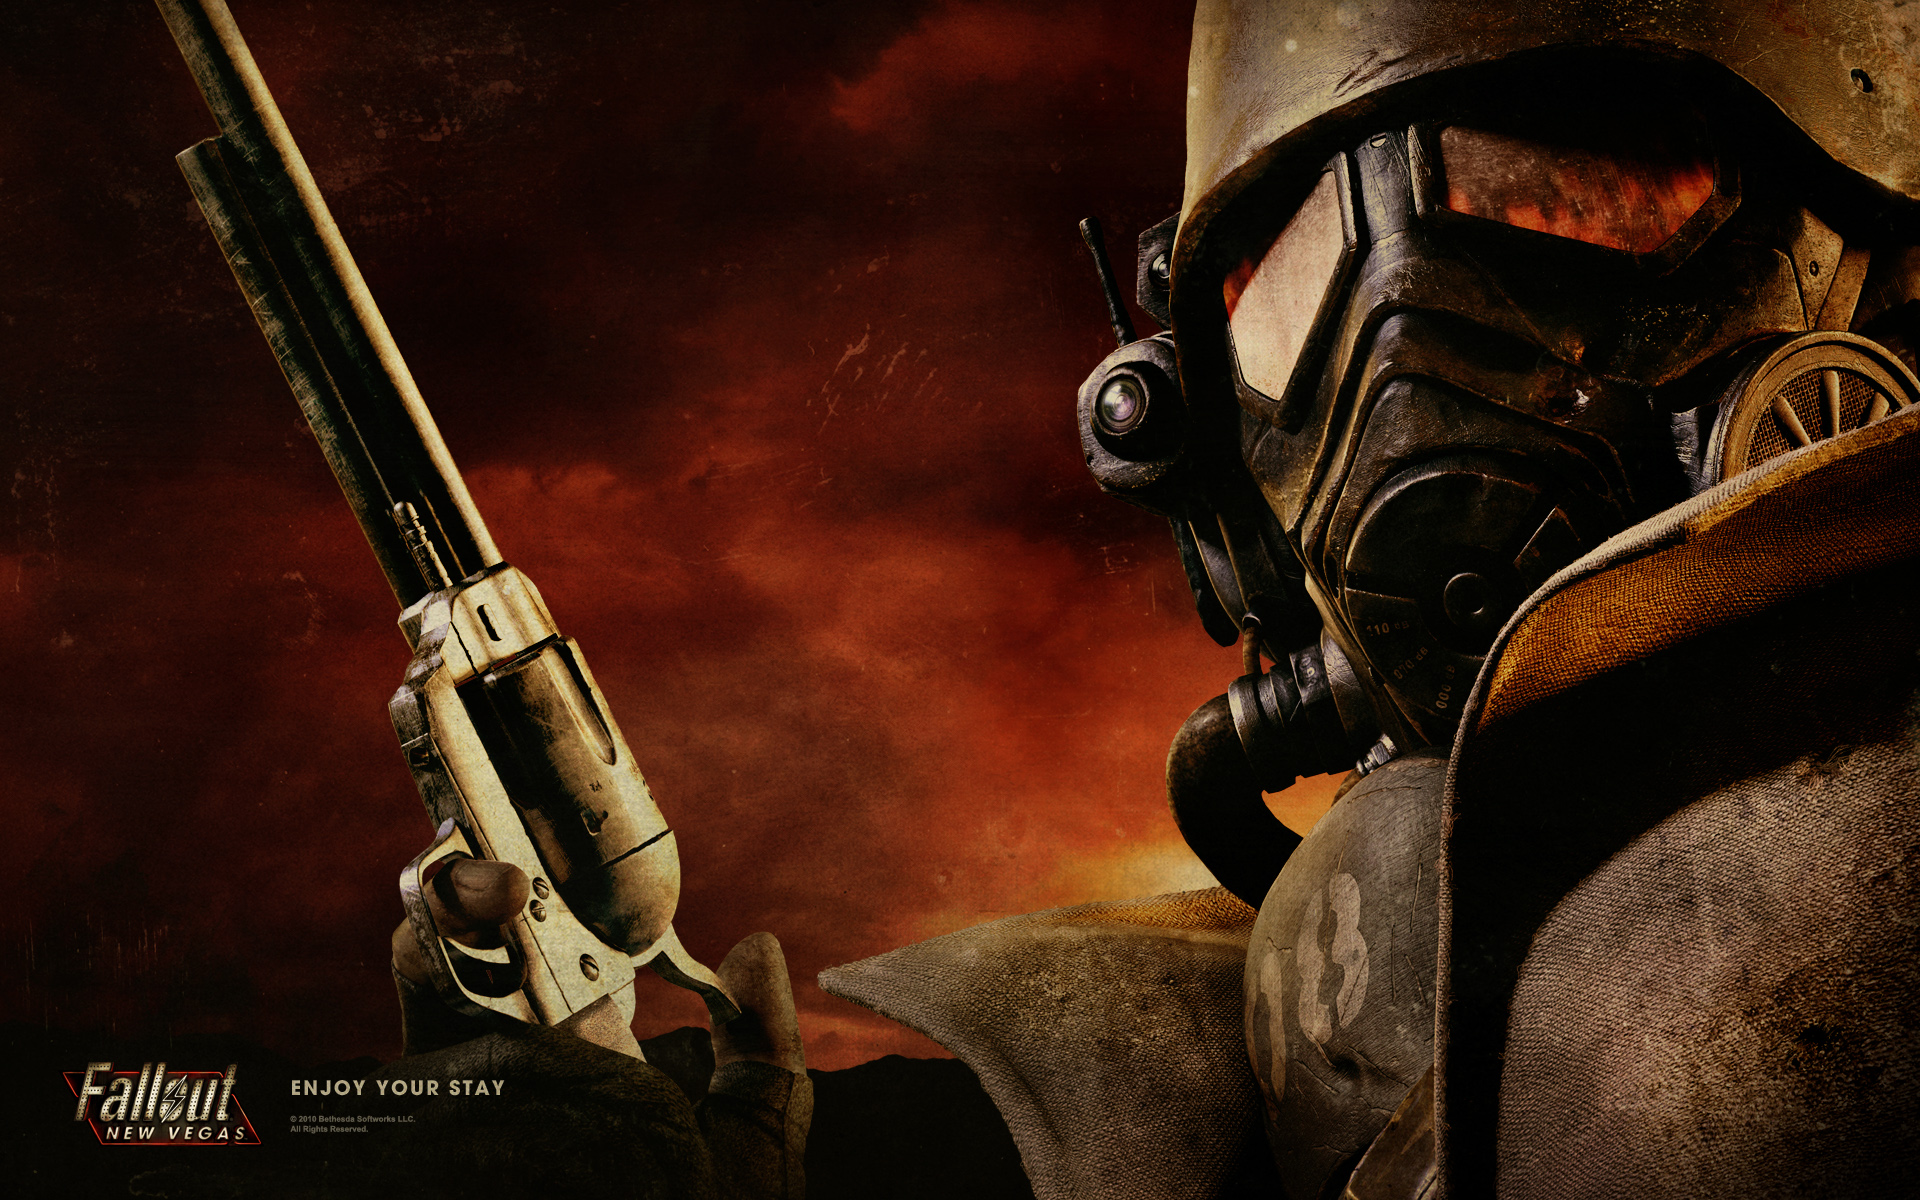 fallout new vegas wallpaper hd,action adventure game,shooter game,pc game,adventure game,strategy video game